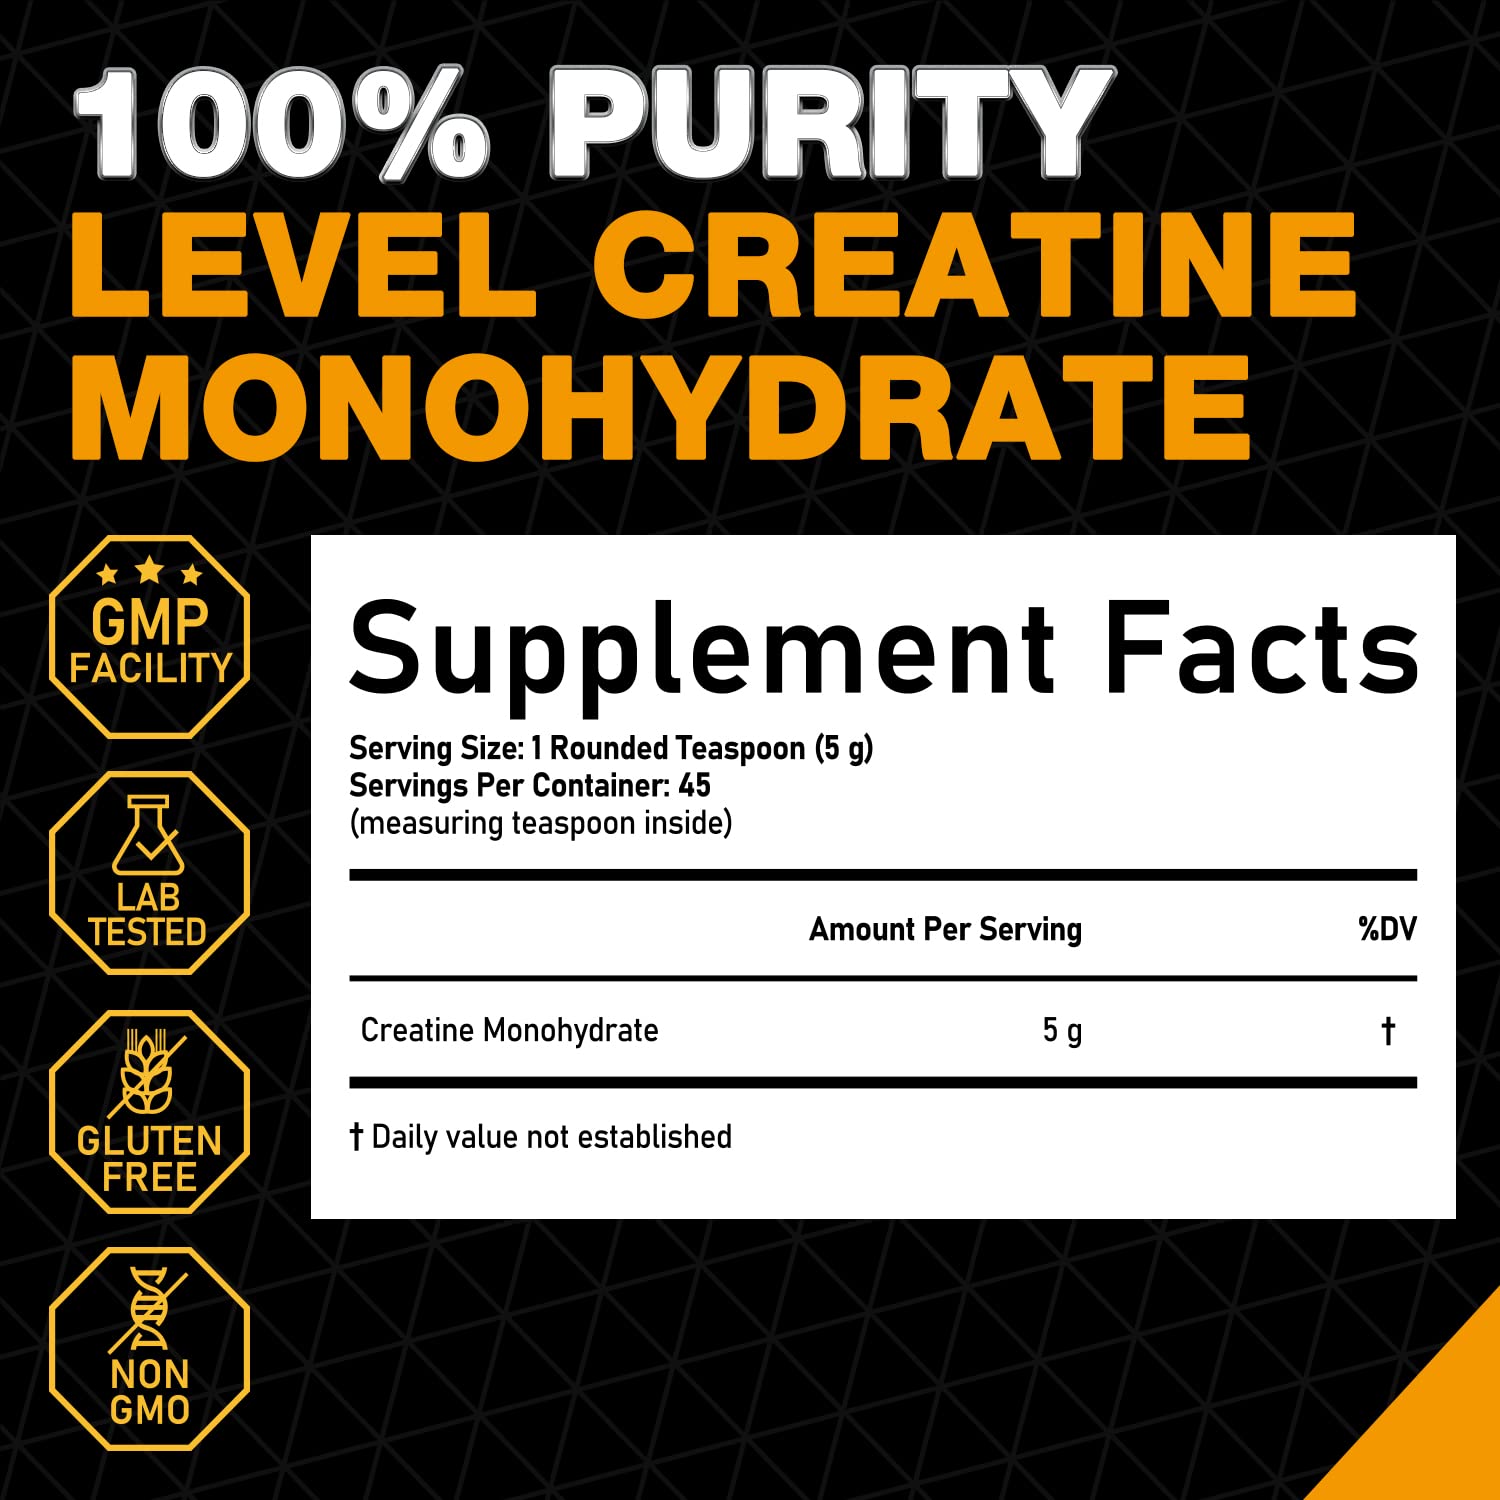 Micronized Creatine Powder (Unflavored), 45 Servings, 5000 MG Creatine Monohydrate, 0 Calories, 0 Sugar, 100% Purity Level, Banned Substance Tested, Keto Friendly, No Bloating, 8oz